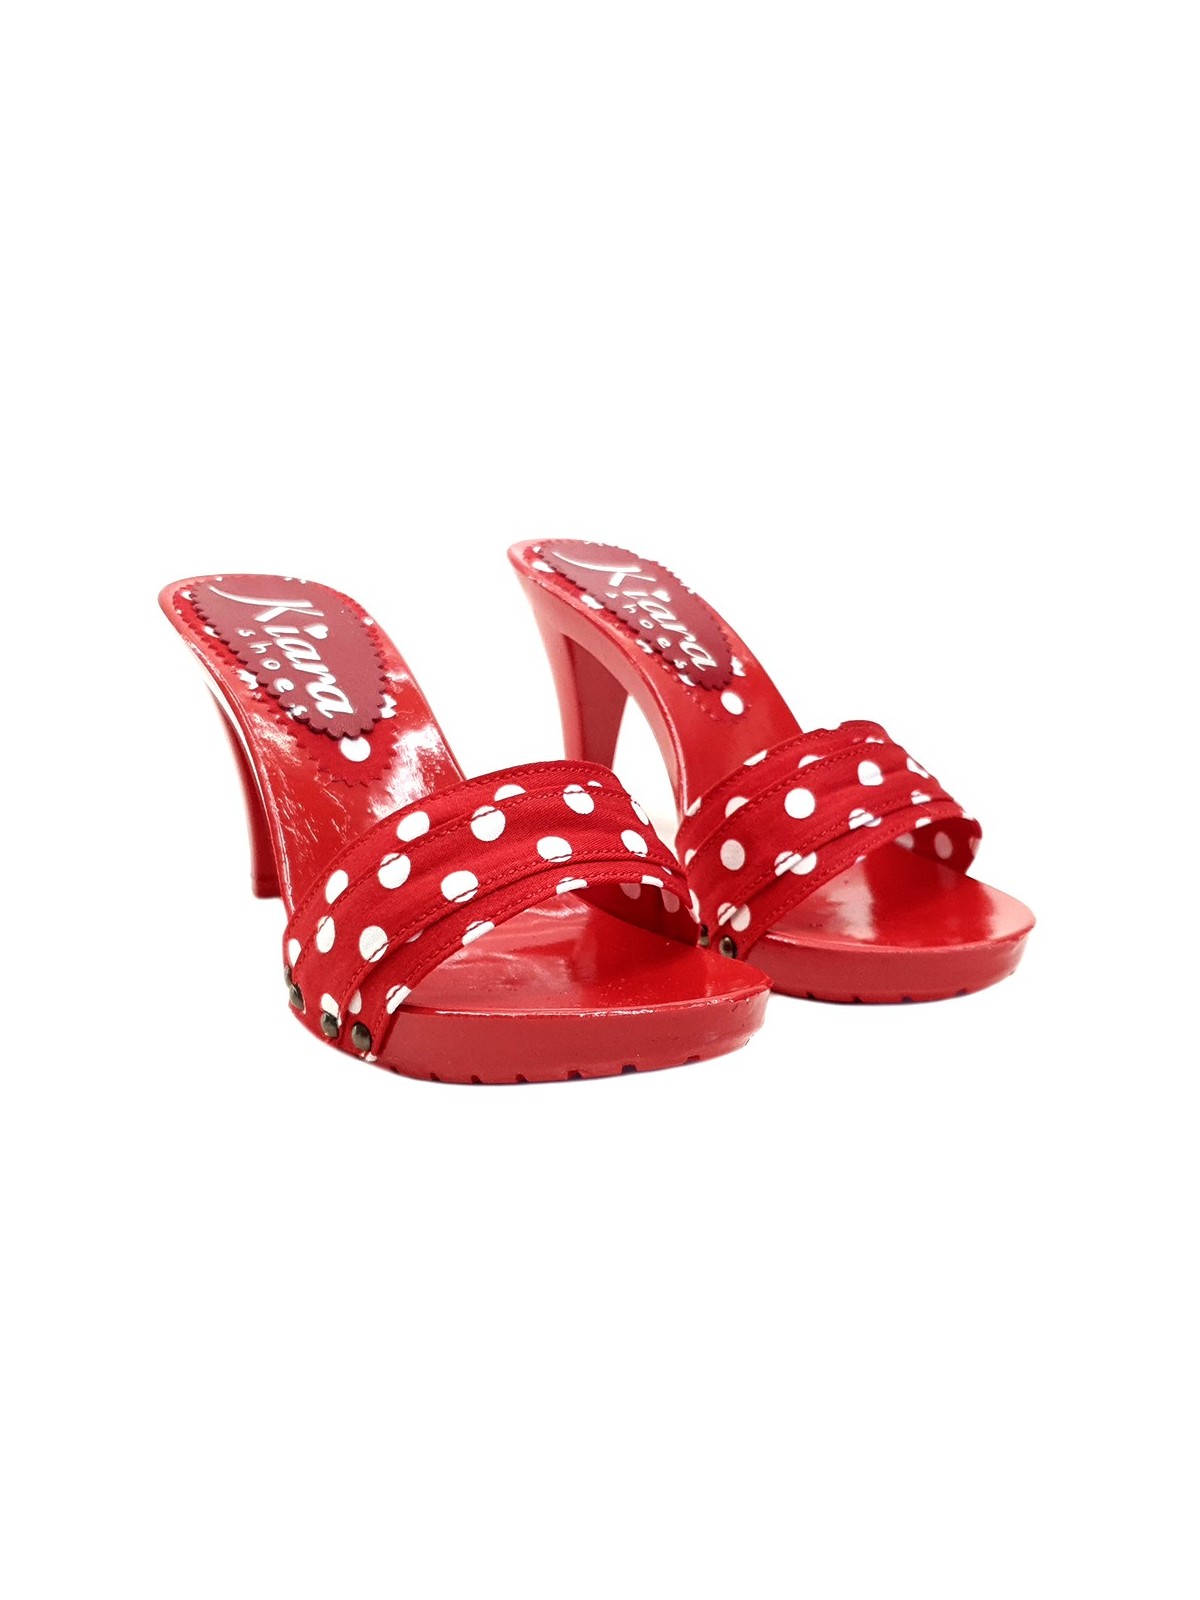 TOTAL RED CLOGS WITH POLKA DOT HEEL 9